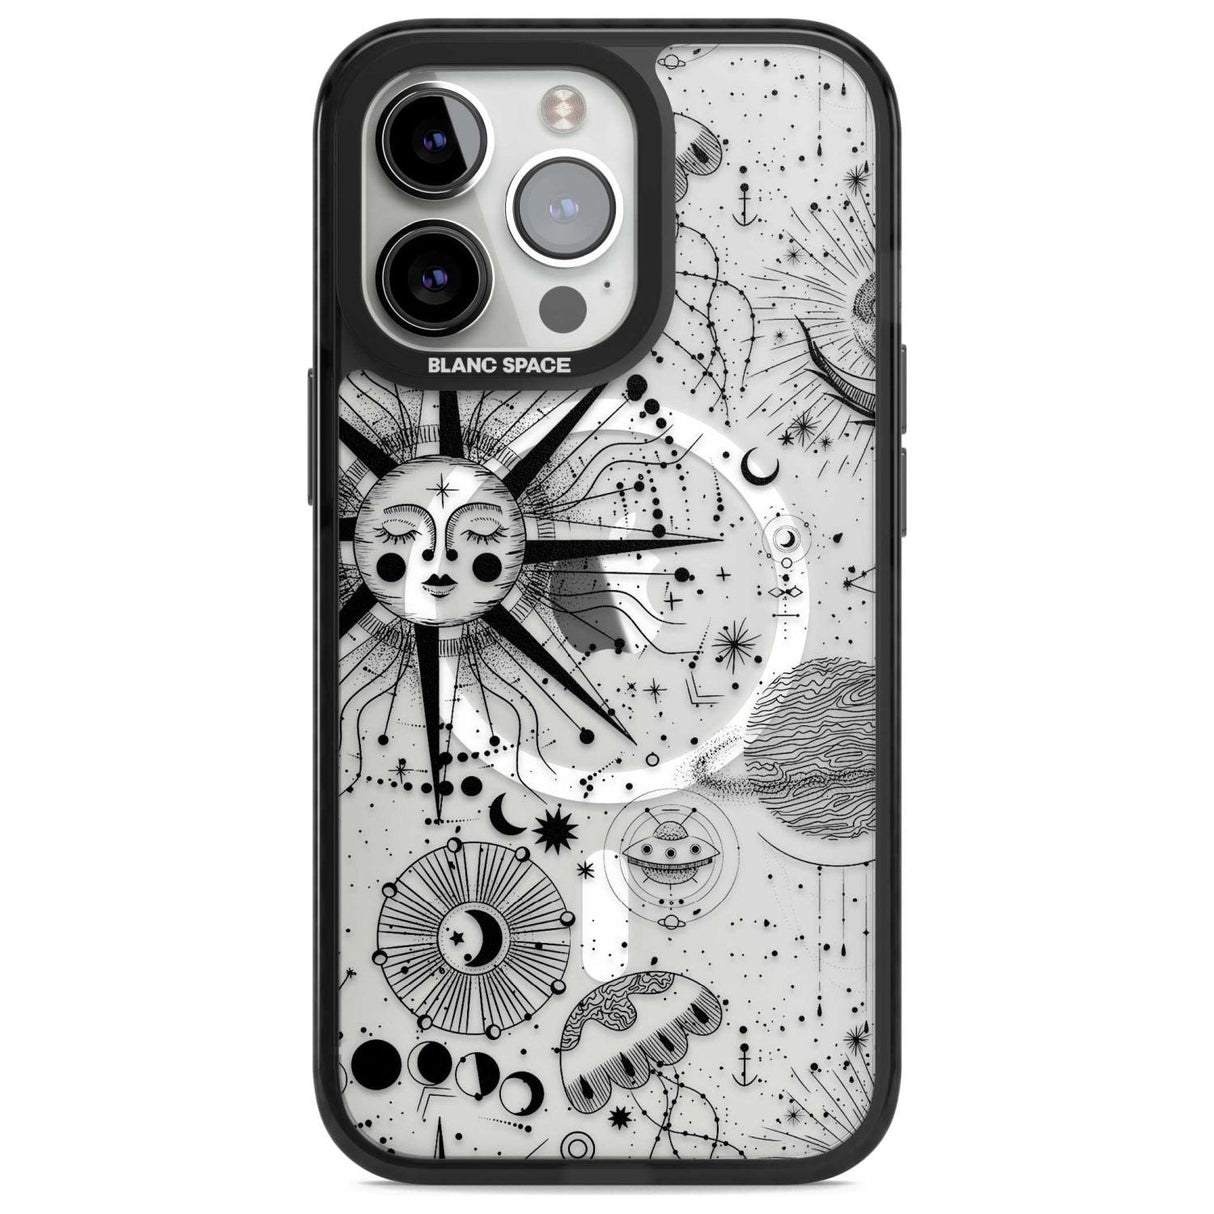 Large Sun Vintage Astrological Phone Case iPhone 15 Pro Max / Magsafe Black Impact Case,iPhone 15 Pro / Magsafe Black Impact Case,iPhone 14 Pro Max / Magsafe Black Impact Case,iPhone 14 Pro / Magsafe Black Impact Case,iPhone 13 Pro / Magsafe Black Impact Case Blanc Space